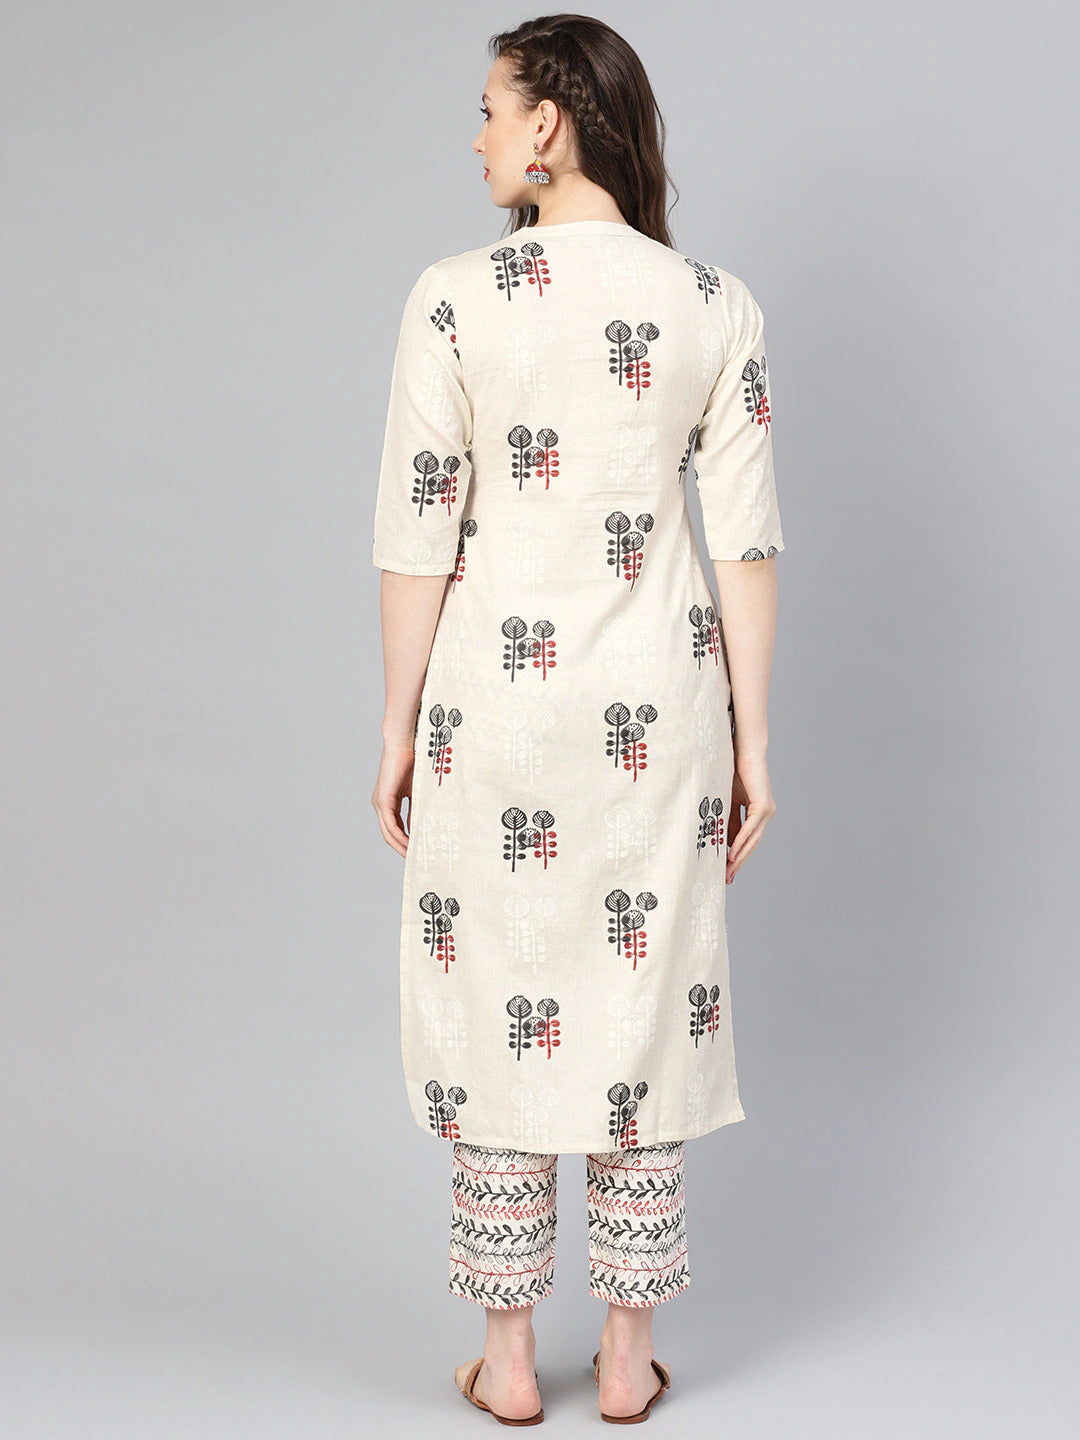 Ethnic Beige Kurta Set - Indian Clothing in Denver, CO, Aurora, CO, Boulder, CO, Fort Collins, CO, Colorado Springs, CO, Parker, CO, Highlands Ranch, CO, Cherry Creek, CO, Centennial, CO, and Longmont, CO. Nationwide shipping USA - India Fashion X